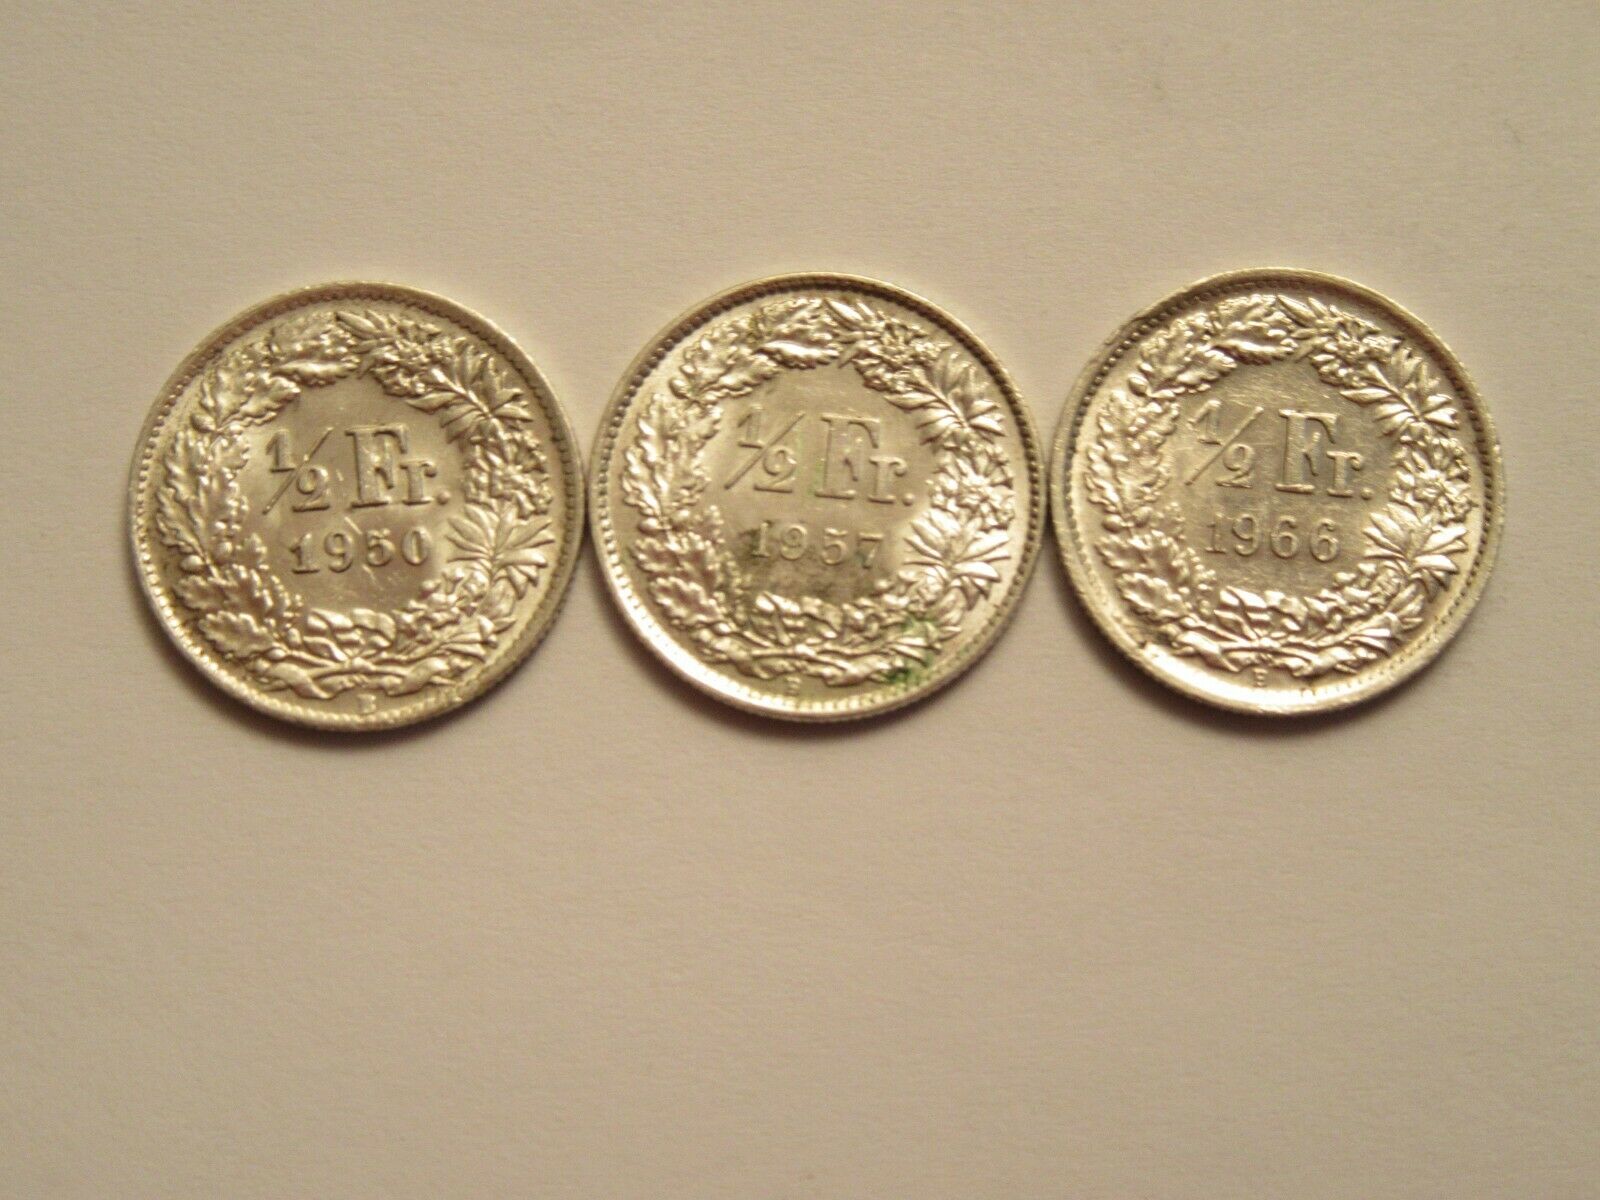 Lot Of 3 Switzerland Silver 1/2 Fr., 1950, 1957, 1966, Nice Condition